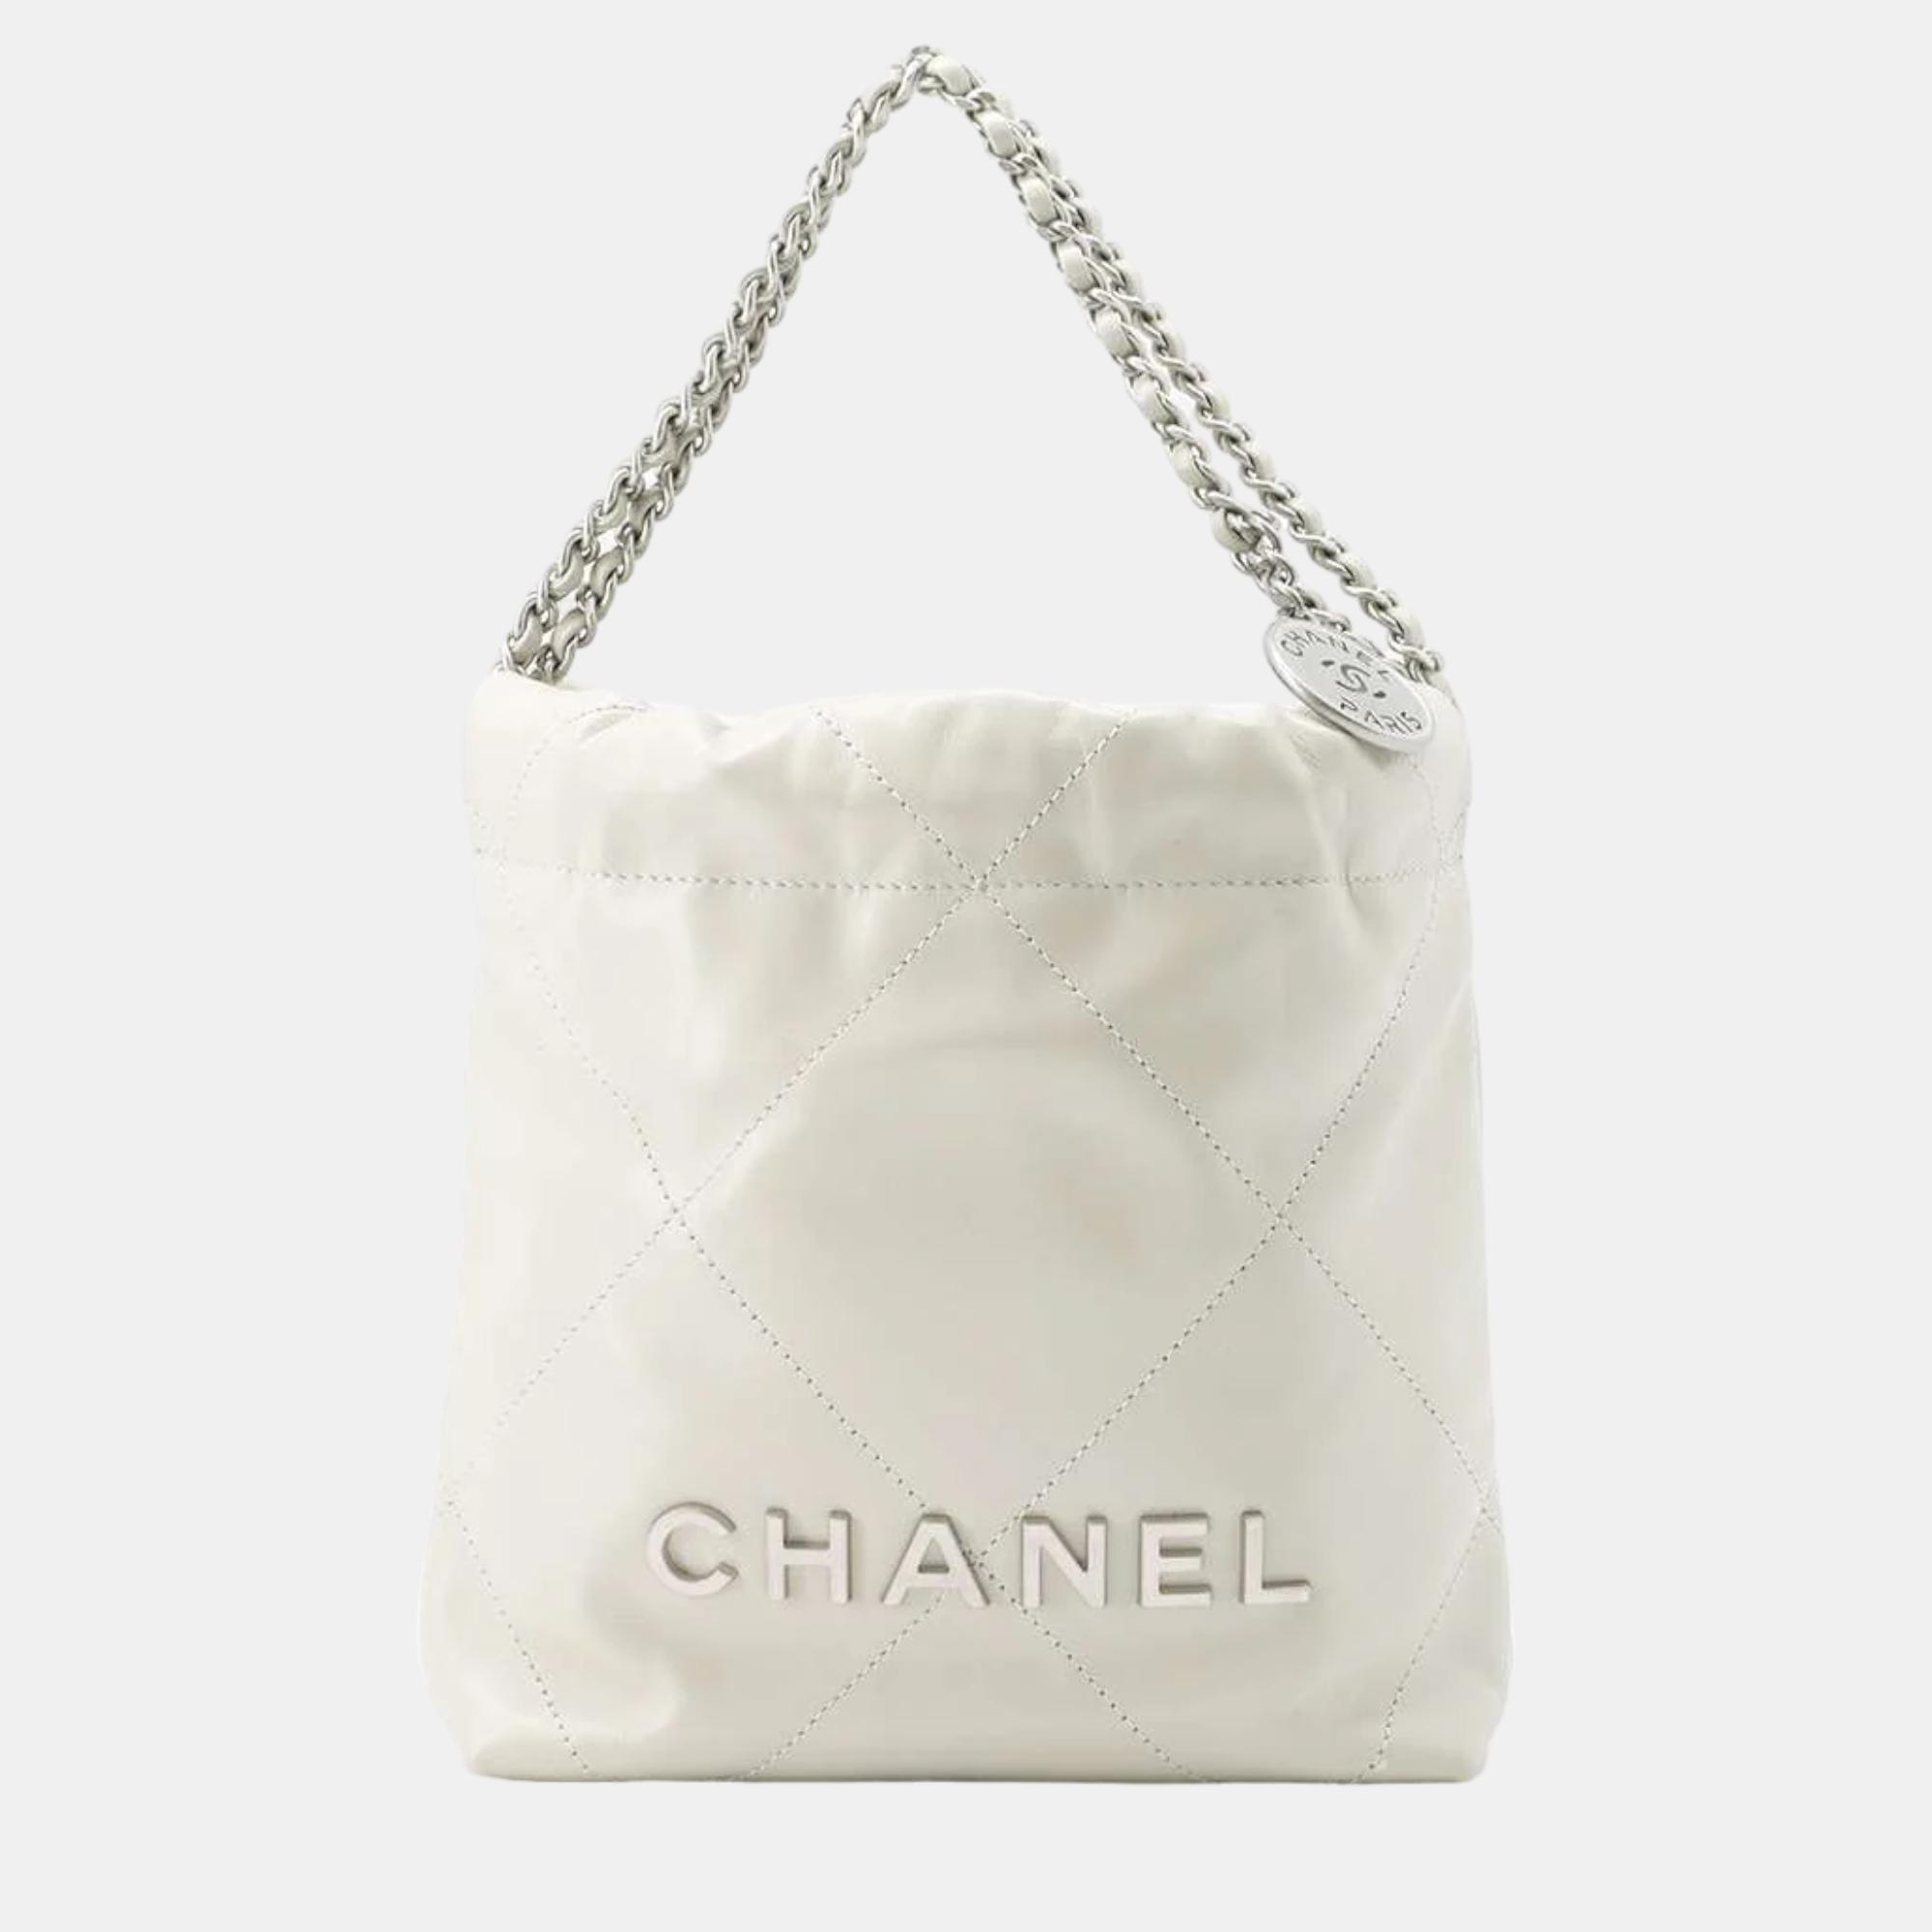 Pre-owned Chanel White Leather Mini 22 Hobo Bag